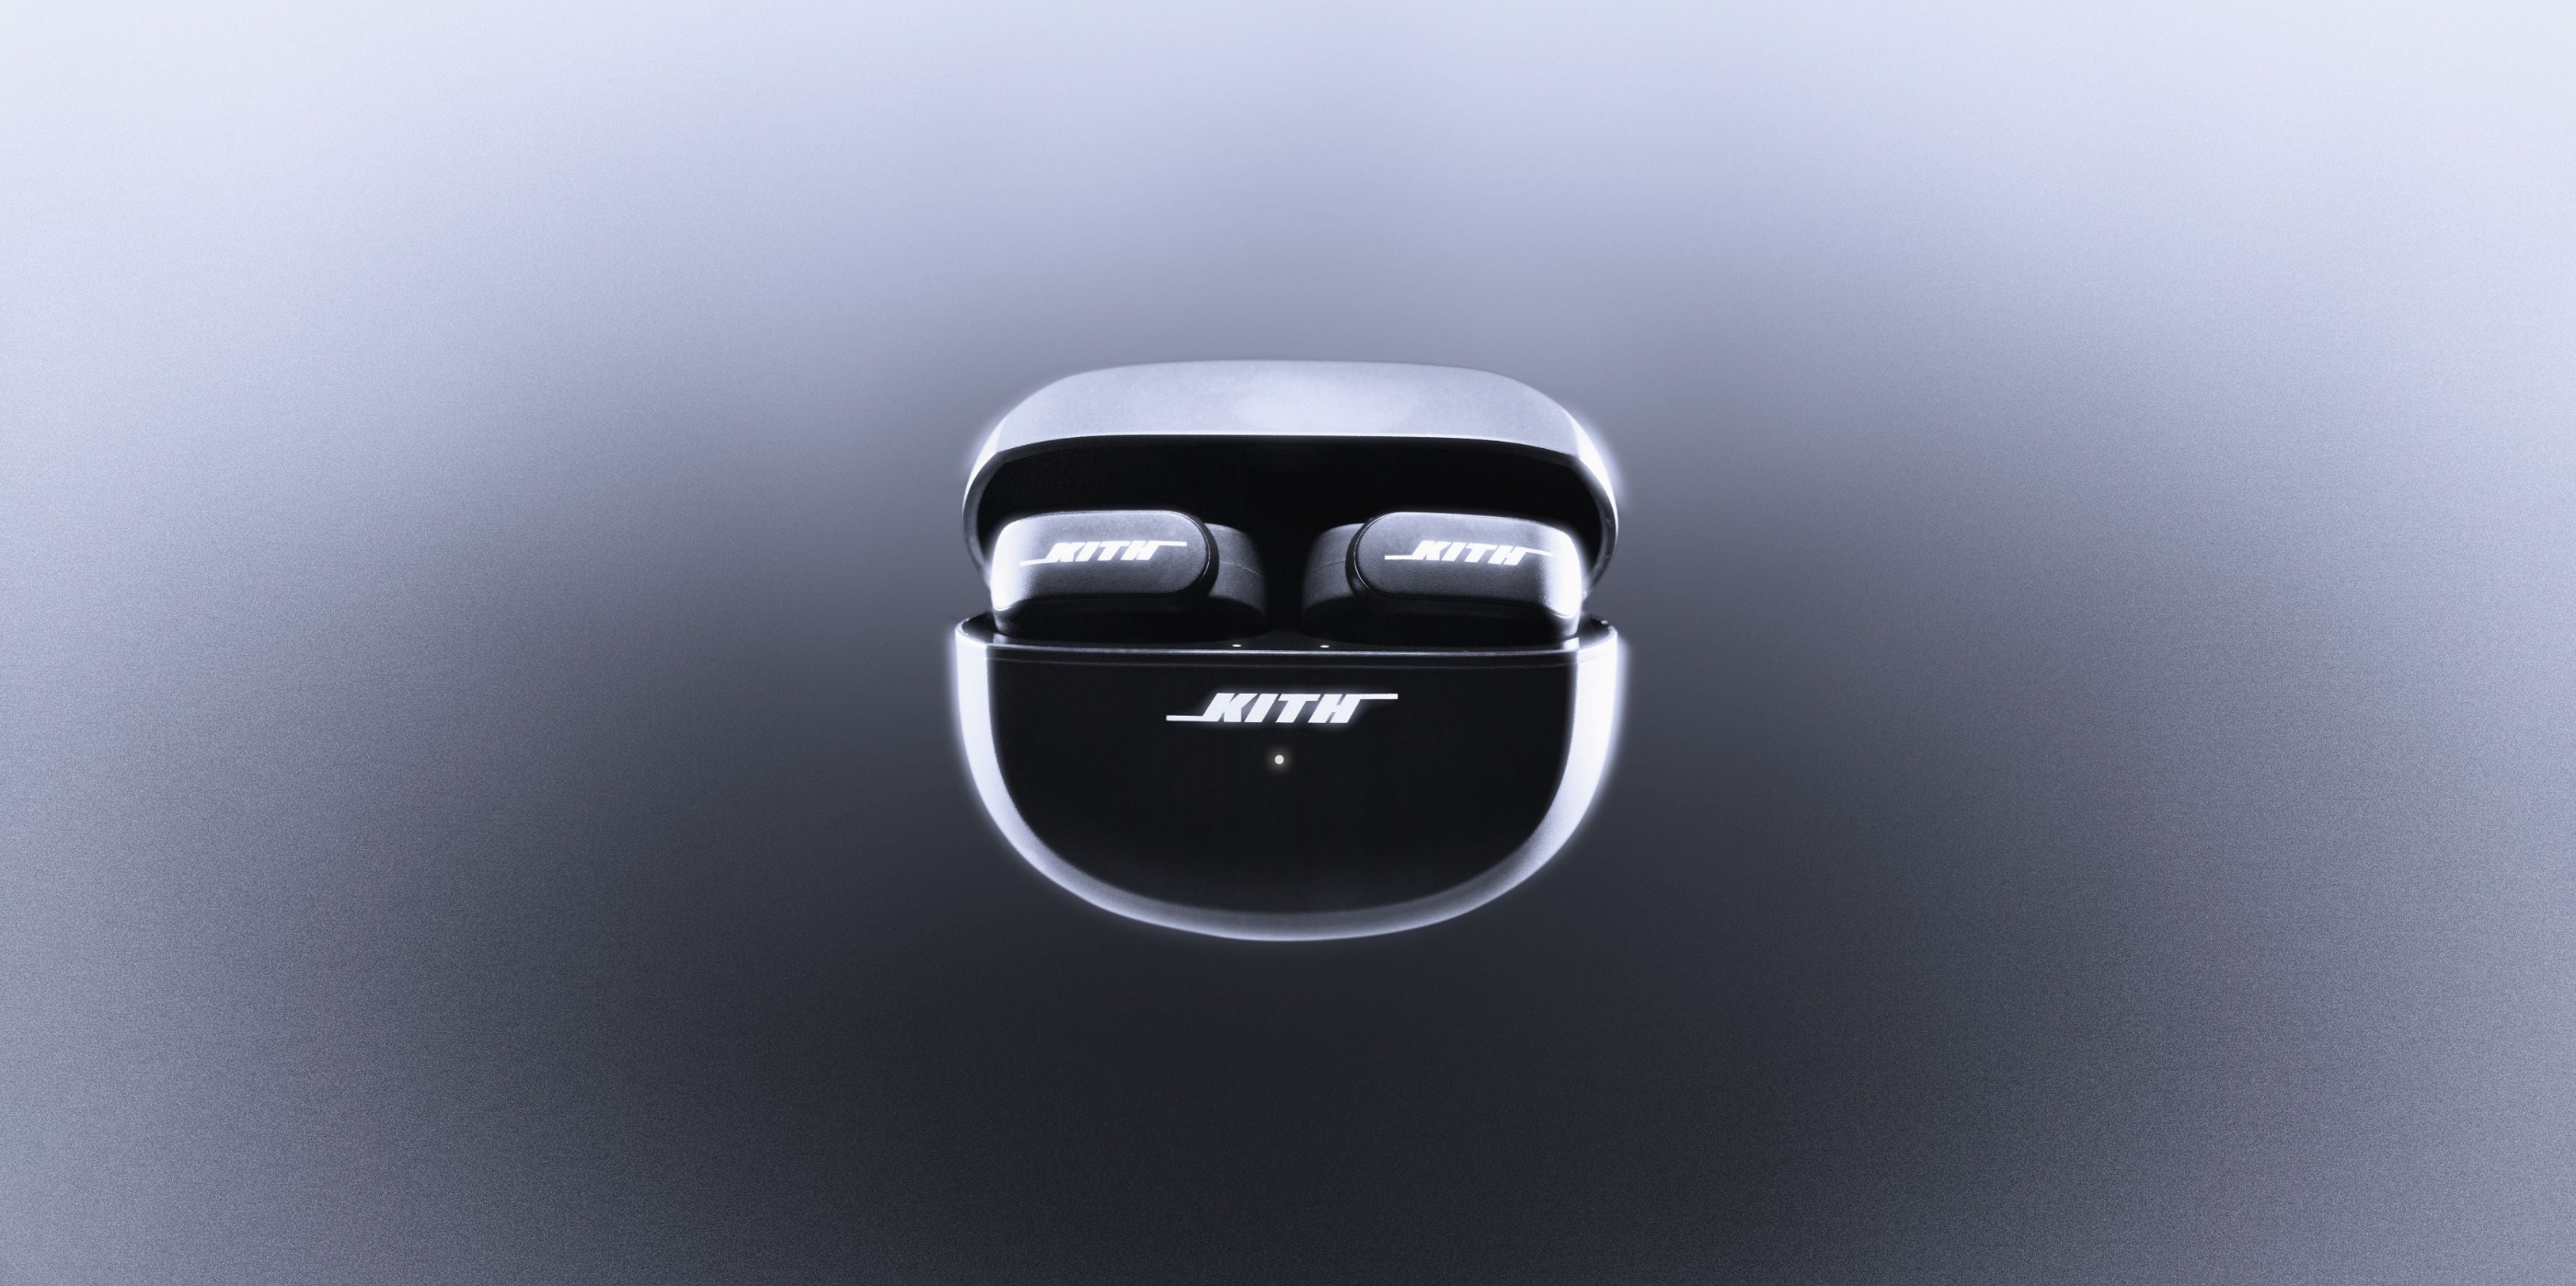 Bose and Kith have unveiled Ultra Open Earbuds with an unusual design and a price of $300